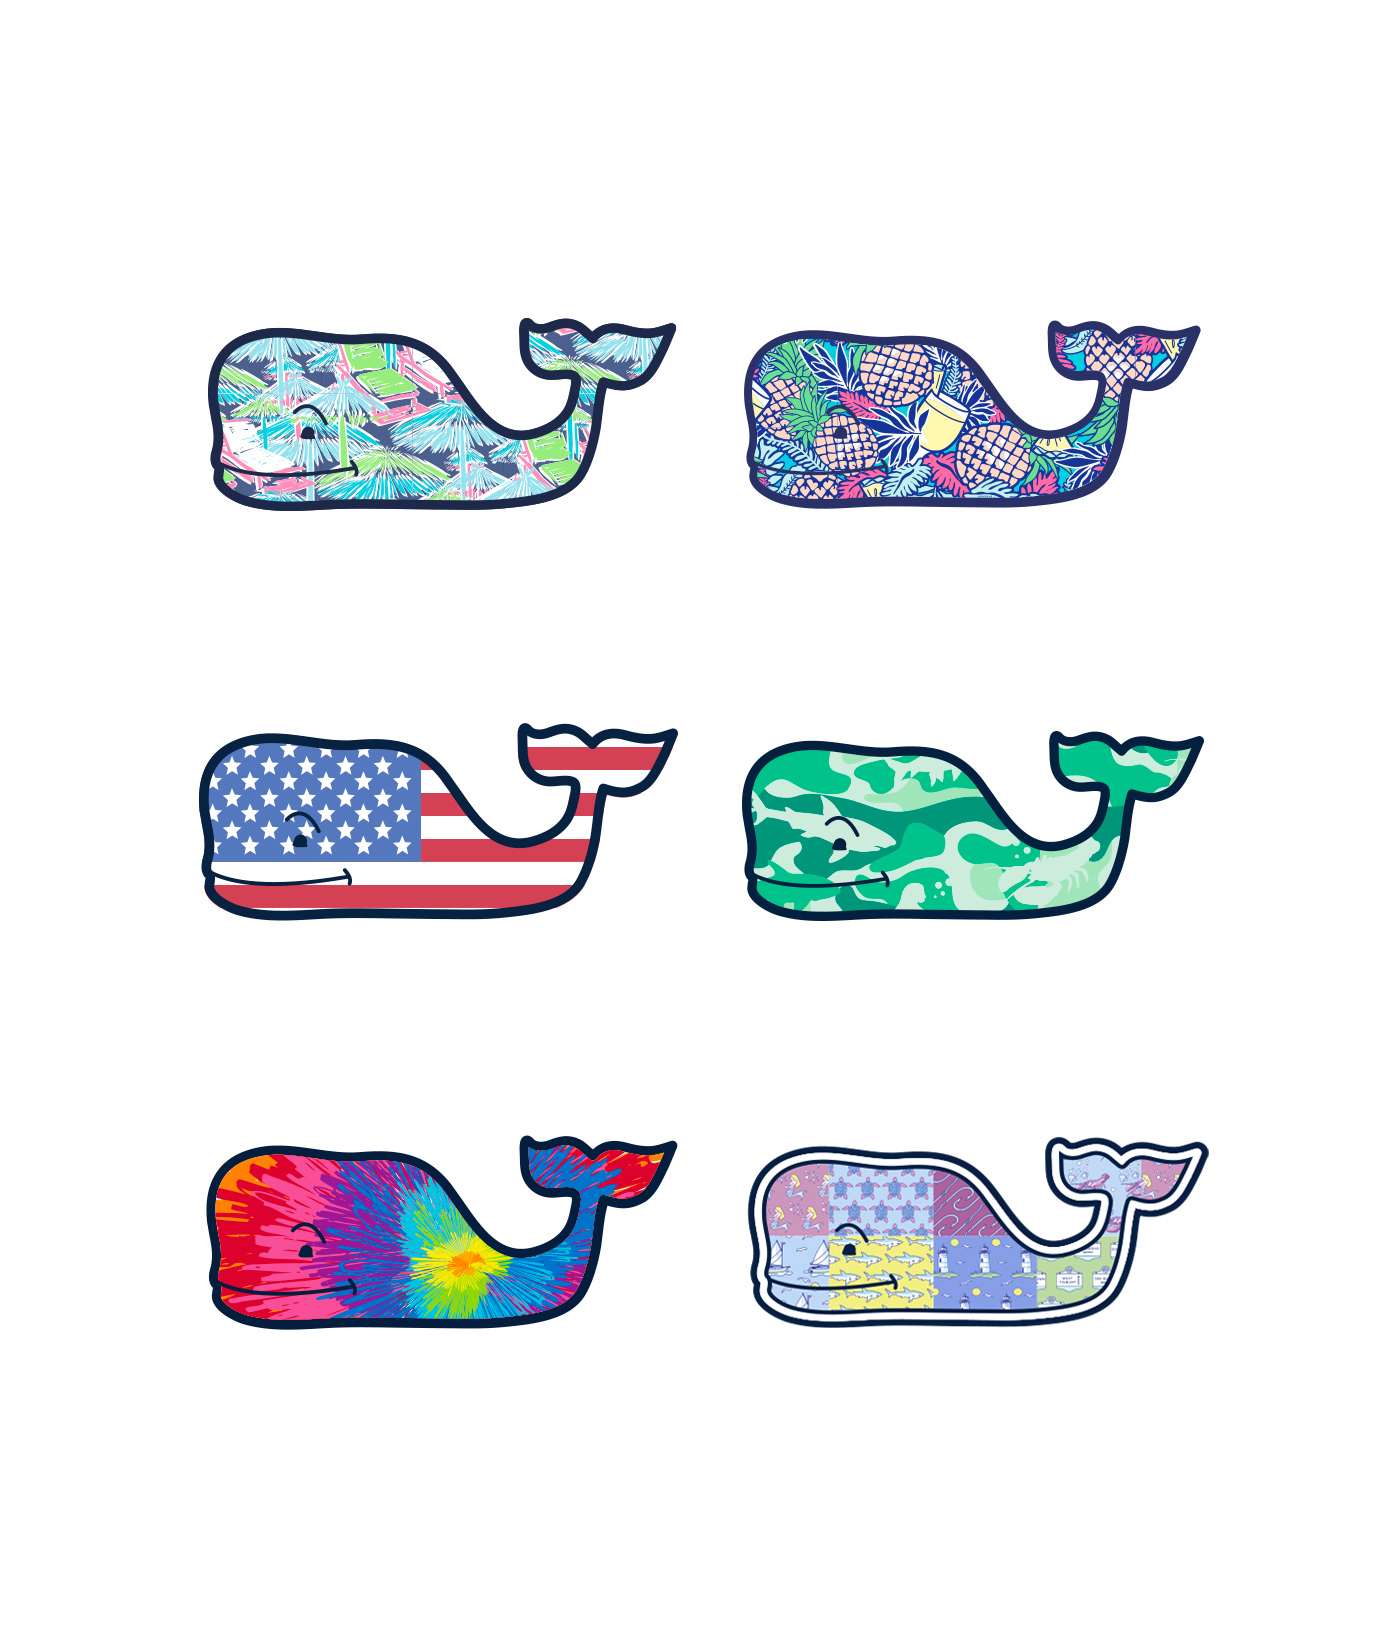 VINEYARD VINES WHALE 4TH OF JULY WHALE STICKER DECAL SOUTHERN PROPER 